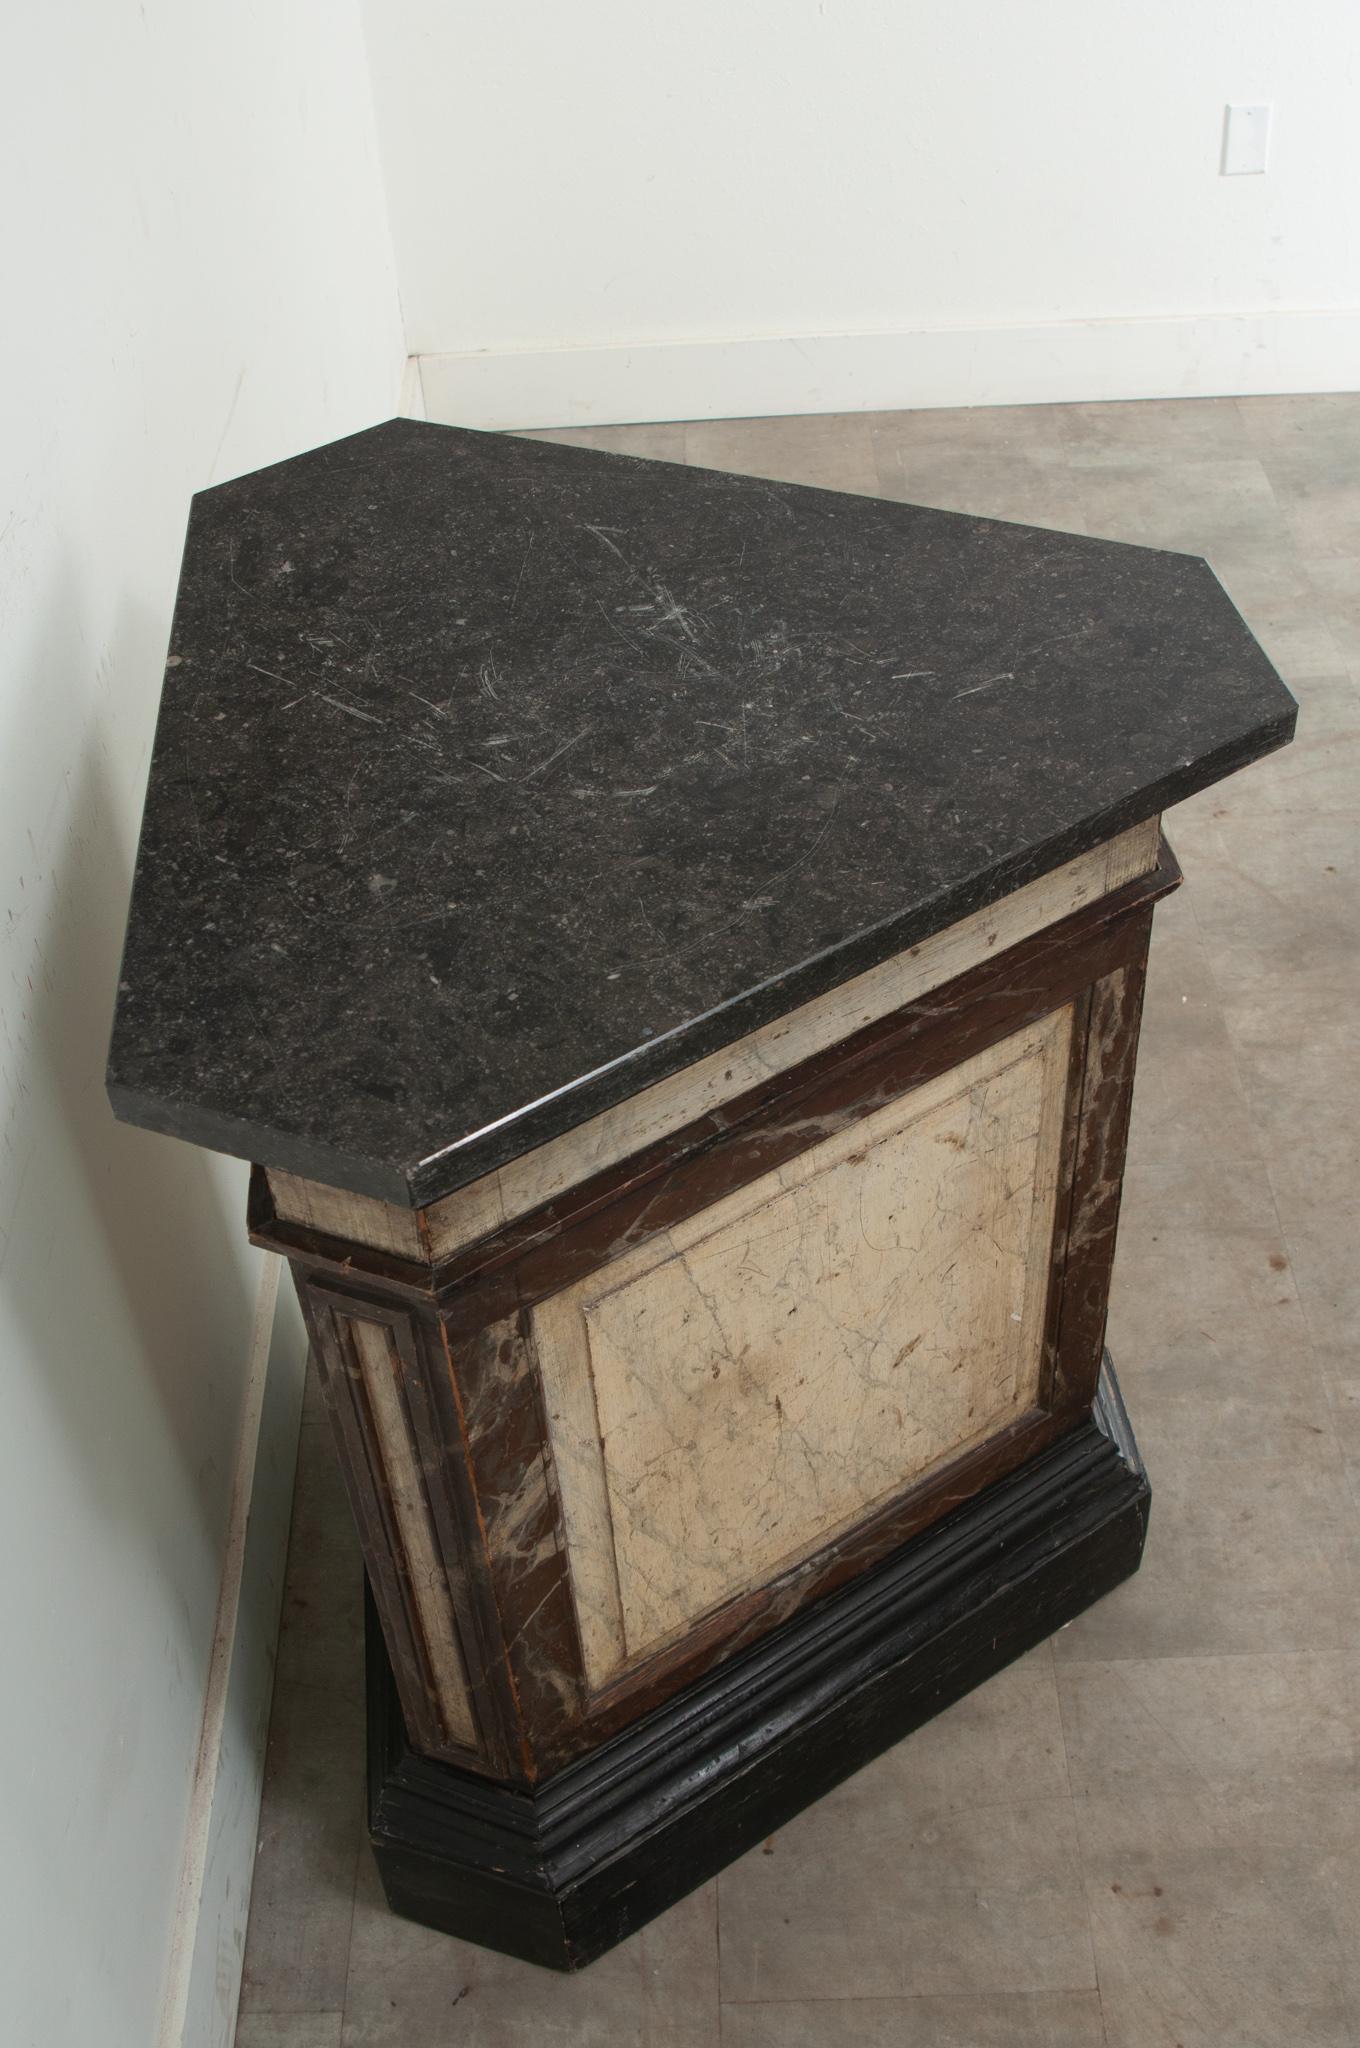 Large Faux Marble Painted Triangular Pedestal In Good Condition For Sale In Baton Rouge, LA